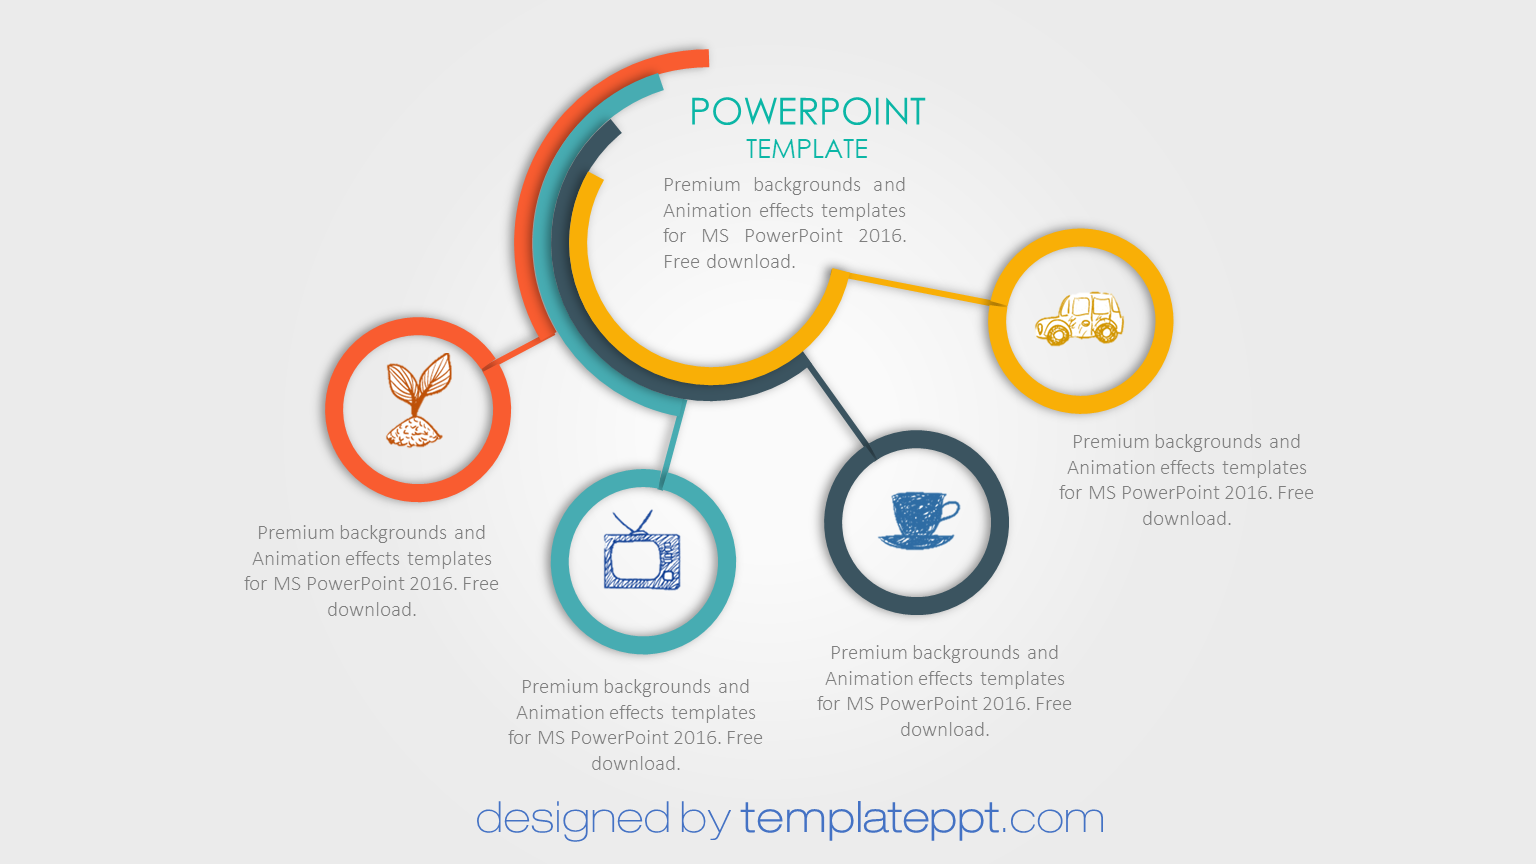 Professional PowerPoint templates free download 2016 | Powerpoint 